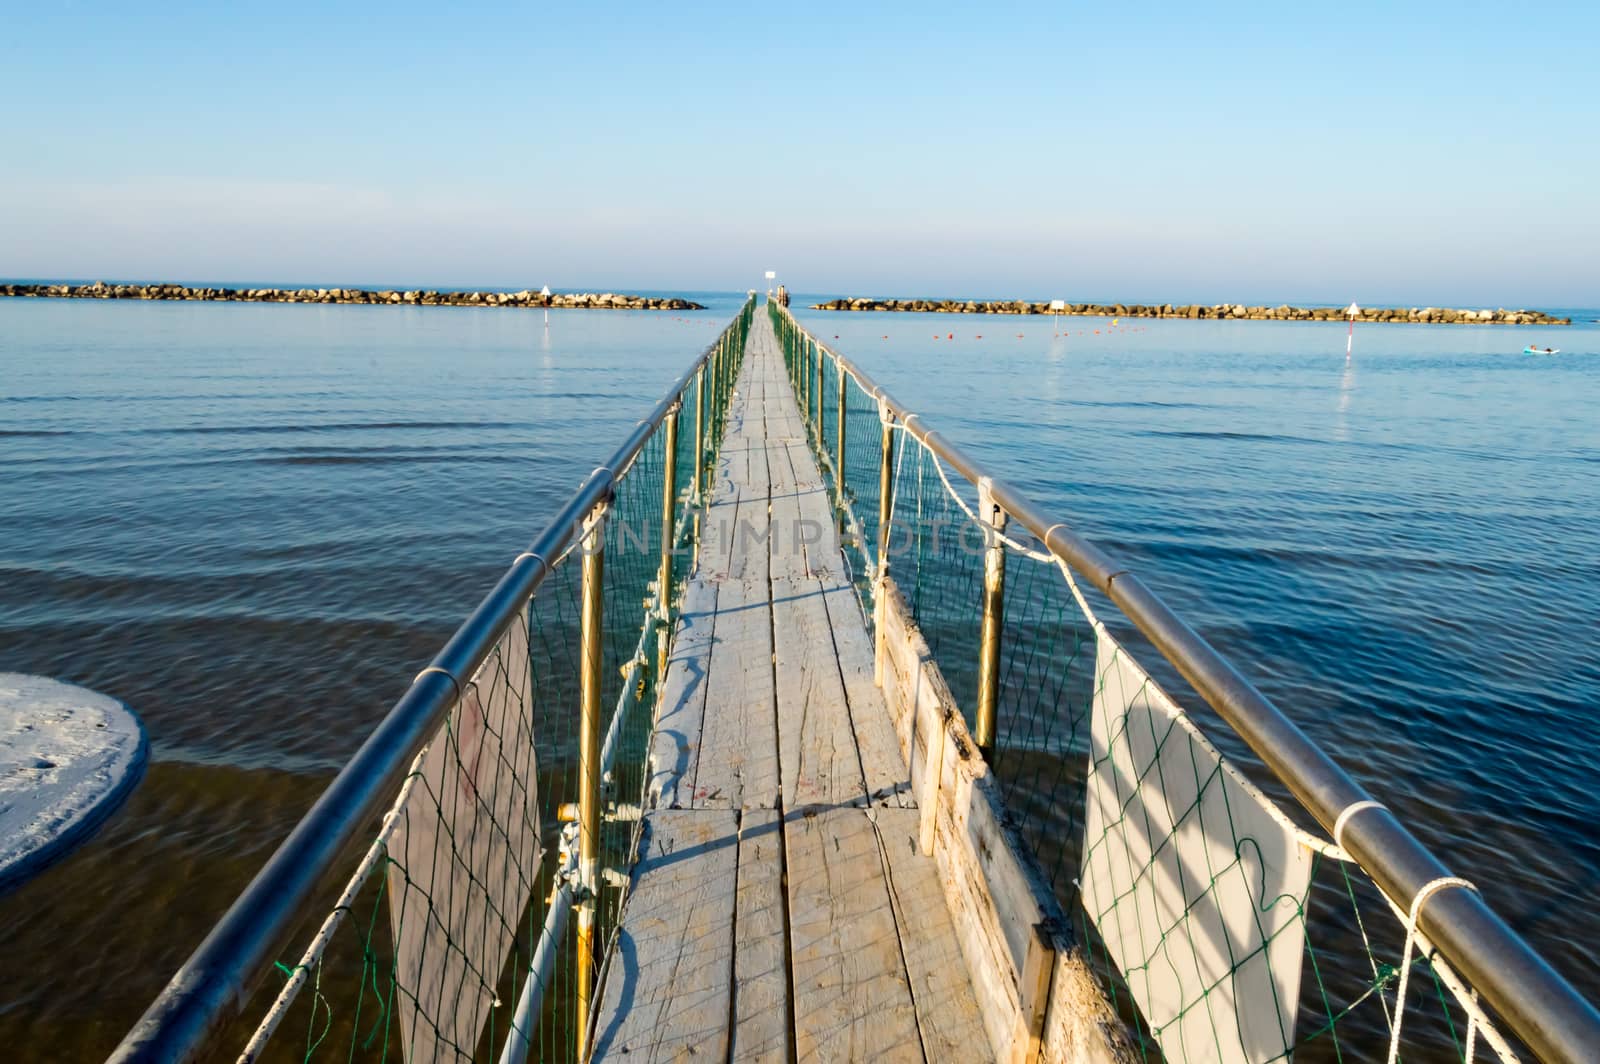 Pier in stainless steel and wood allow the boarding of tourists on the boats of Igea Marina near Rimini in Italy